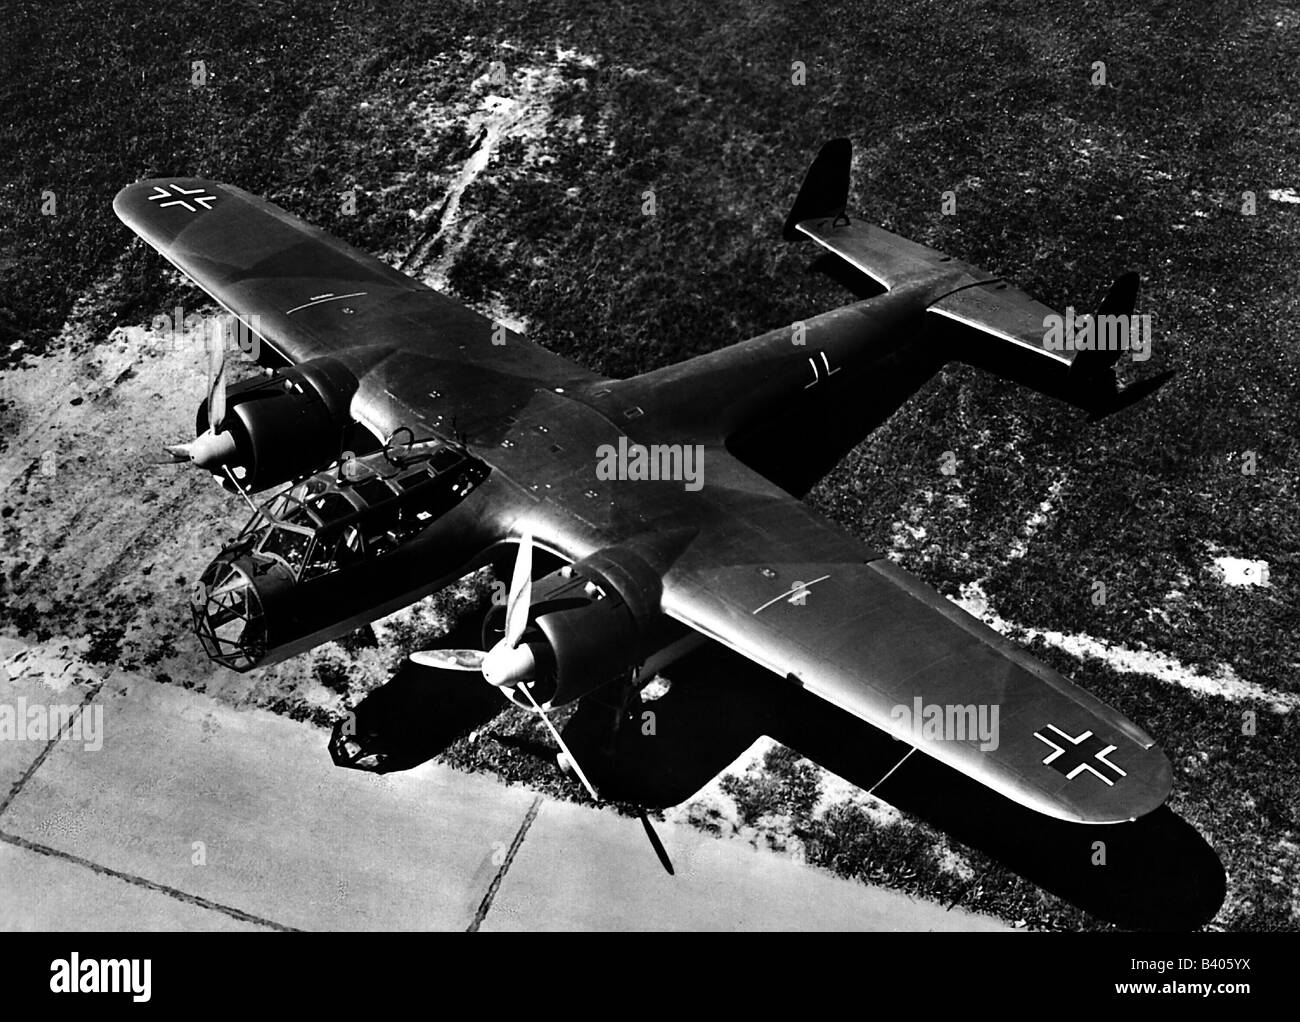 events, Second World War / WWII, aerial warfare, aircraft, German bomber Dornier Do 17 Z, circa 1940, Do-17, Do17, bombers, 20th century, historic, historical, Luftwaffe, Wehrmacht, Germany, Third Reich, plane, planes, 1940s, Stock Photo